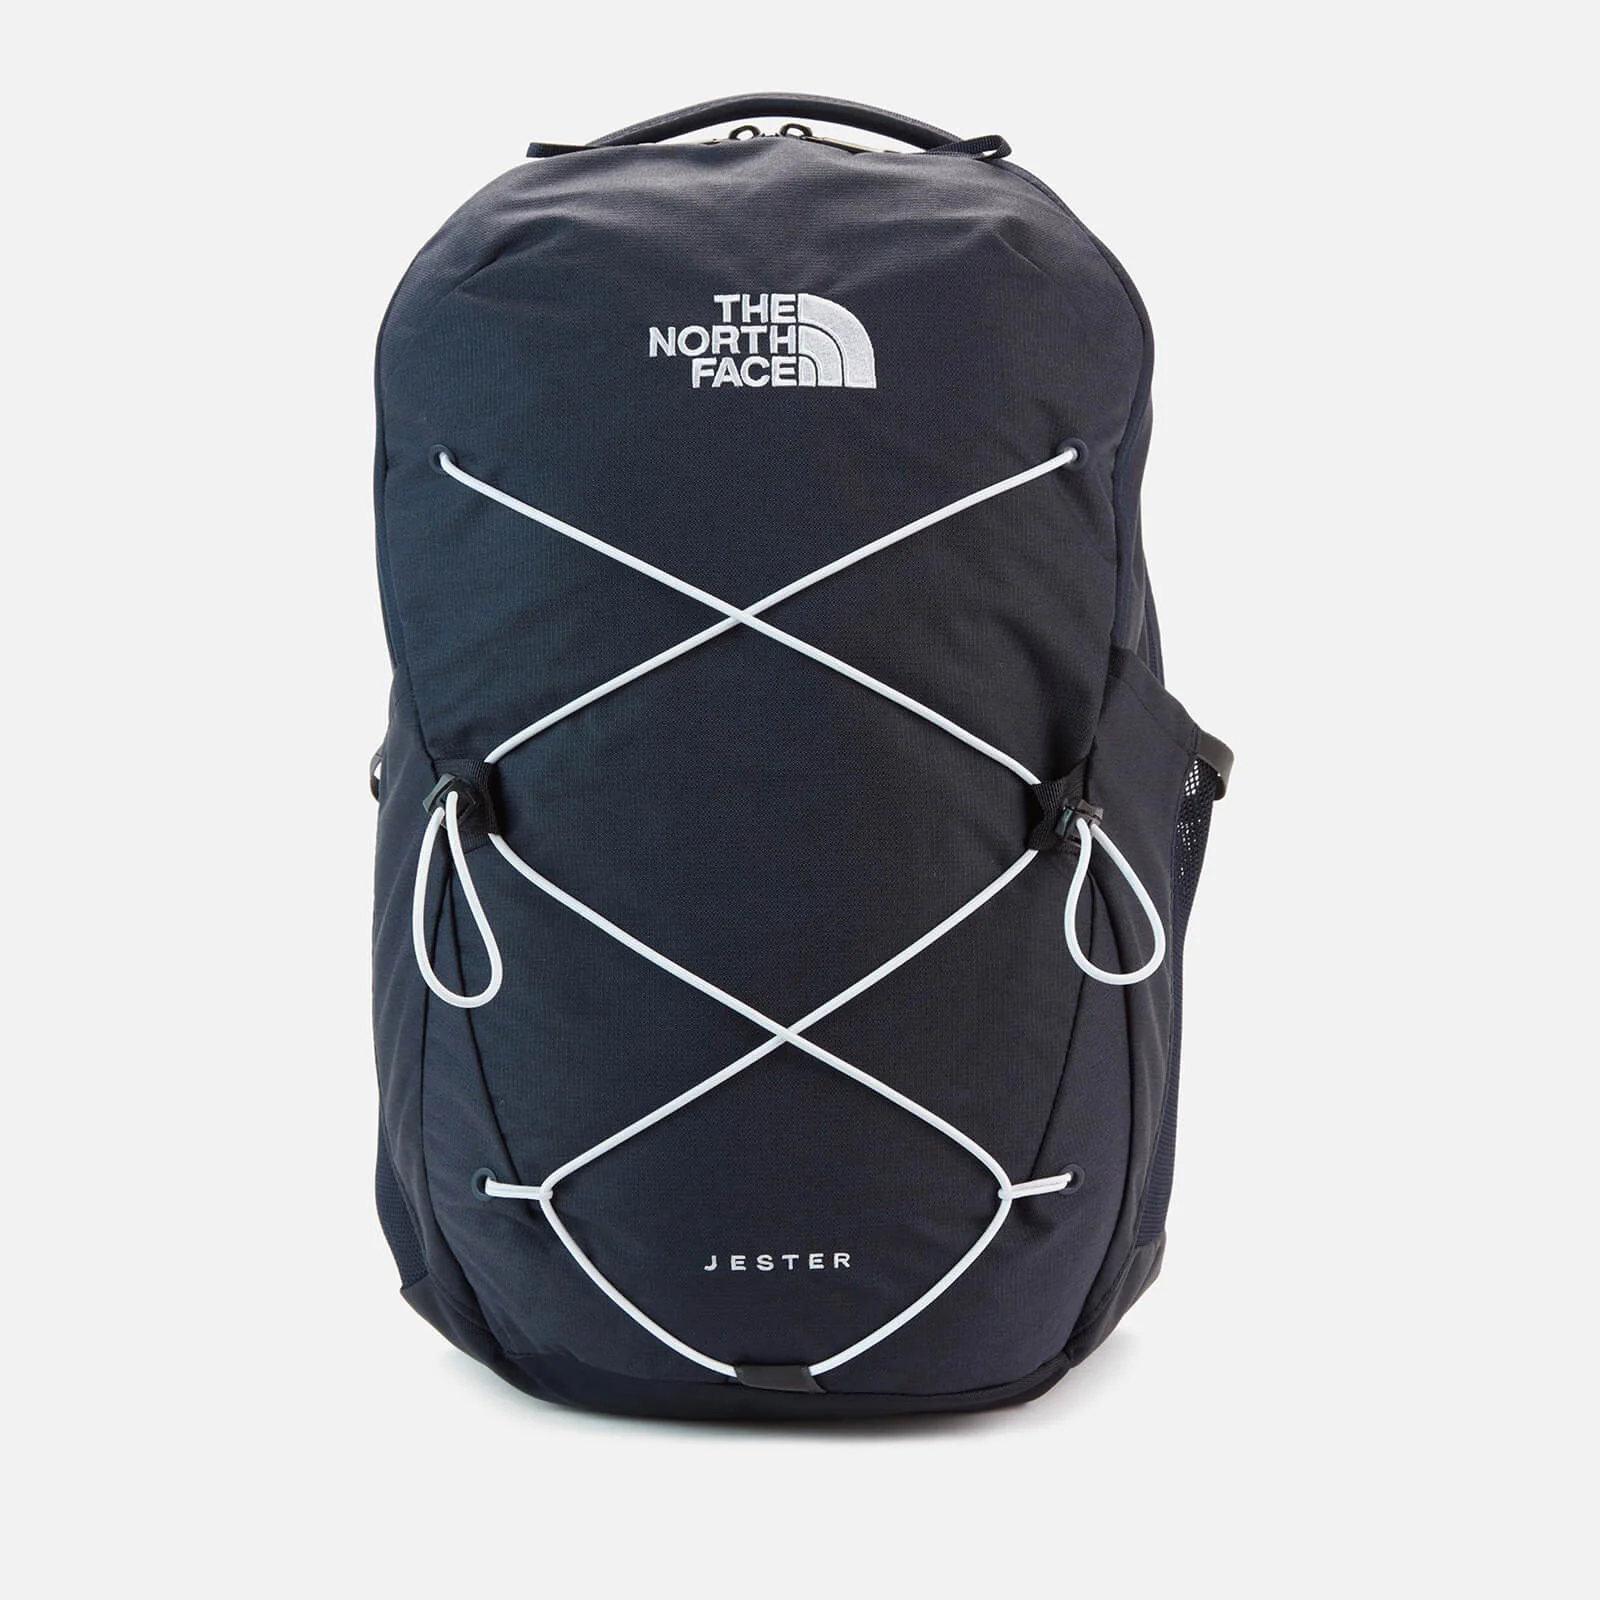 The North Face Jester Backpack - Aviator Navy Image 1